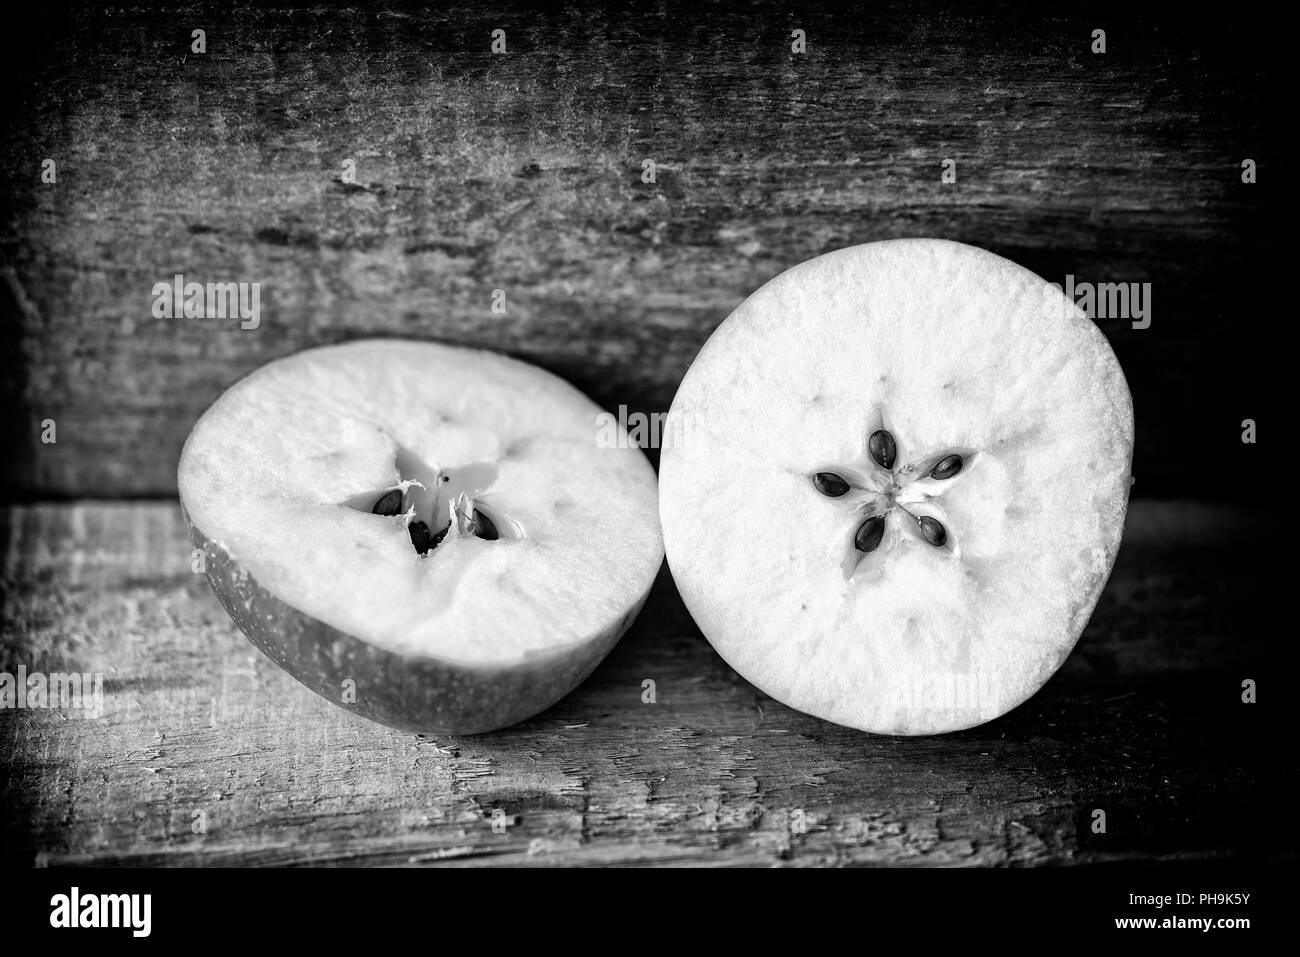 Cut apple on a wooden plank, showing the seeds in a delicate five pointed star motive. Black and white photo Stock Photo